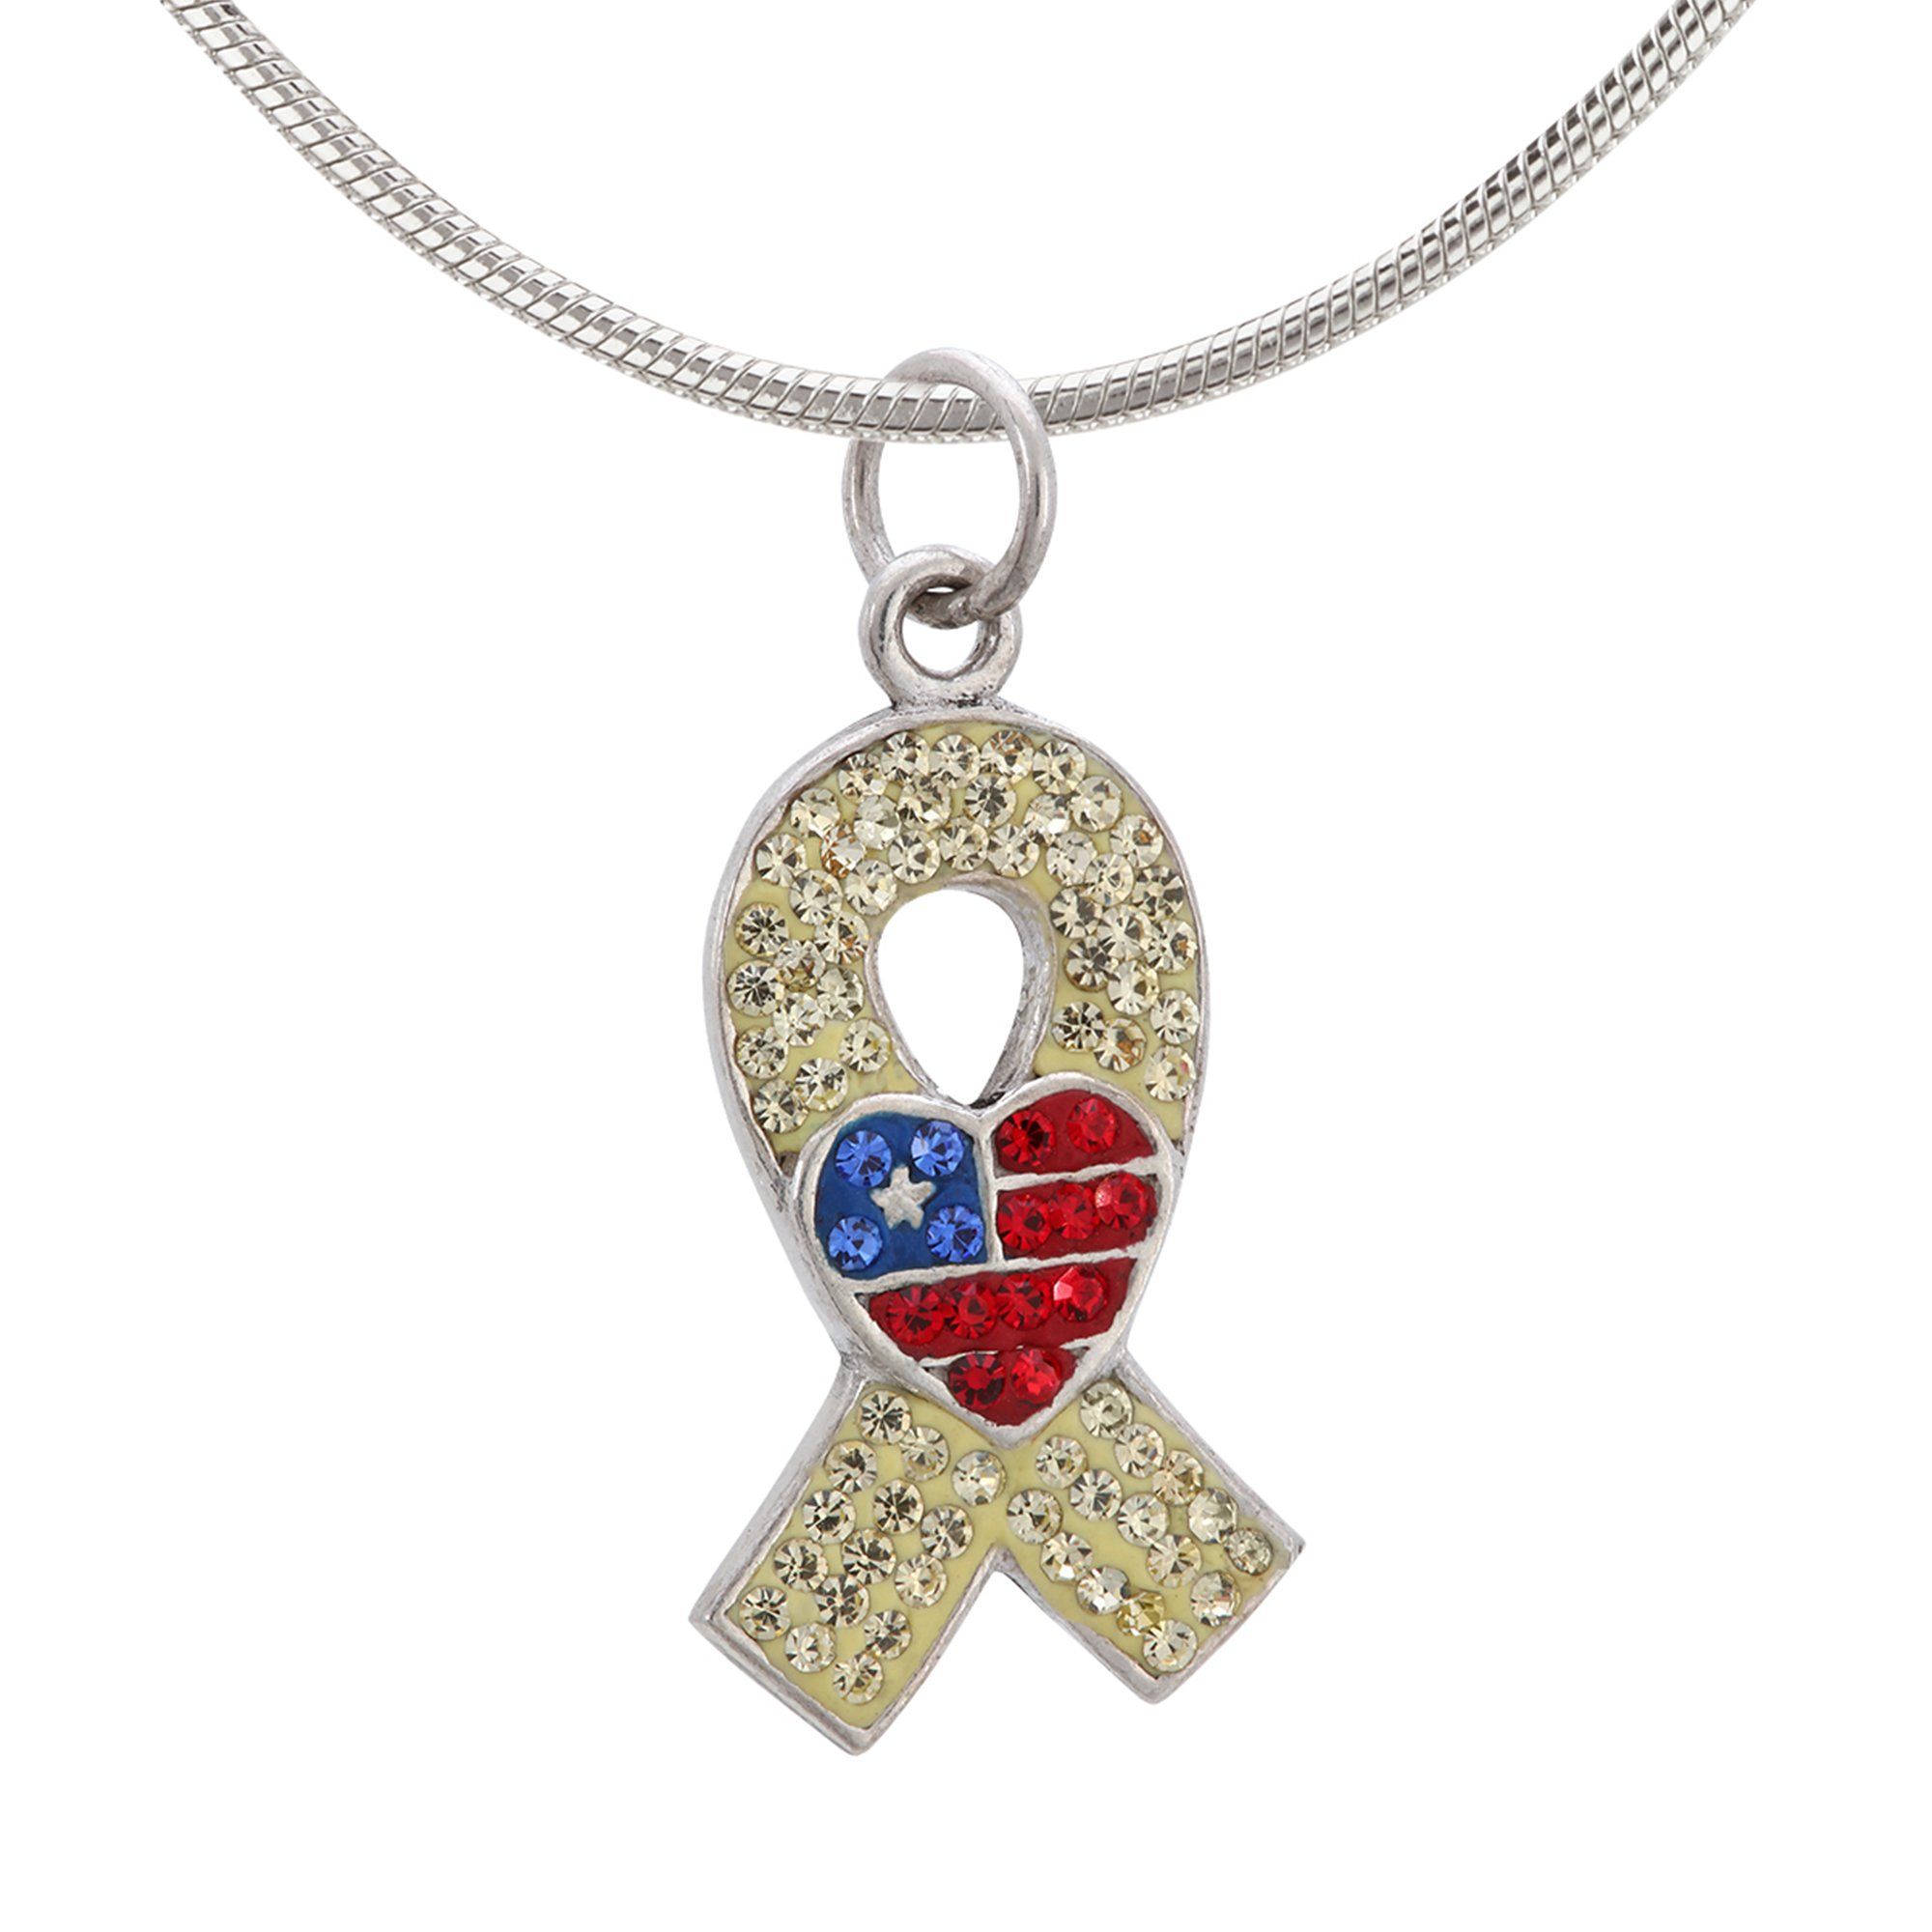 American Heart Yellow Ribbon Crystal & Sterling Necklace - Pendant Only